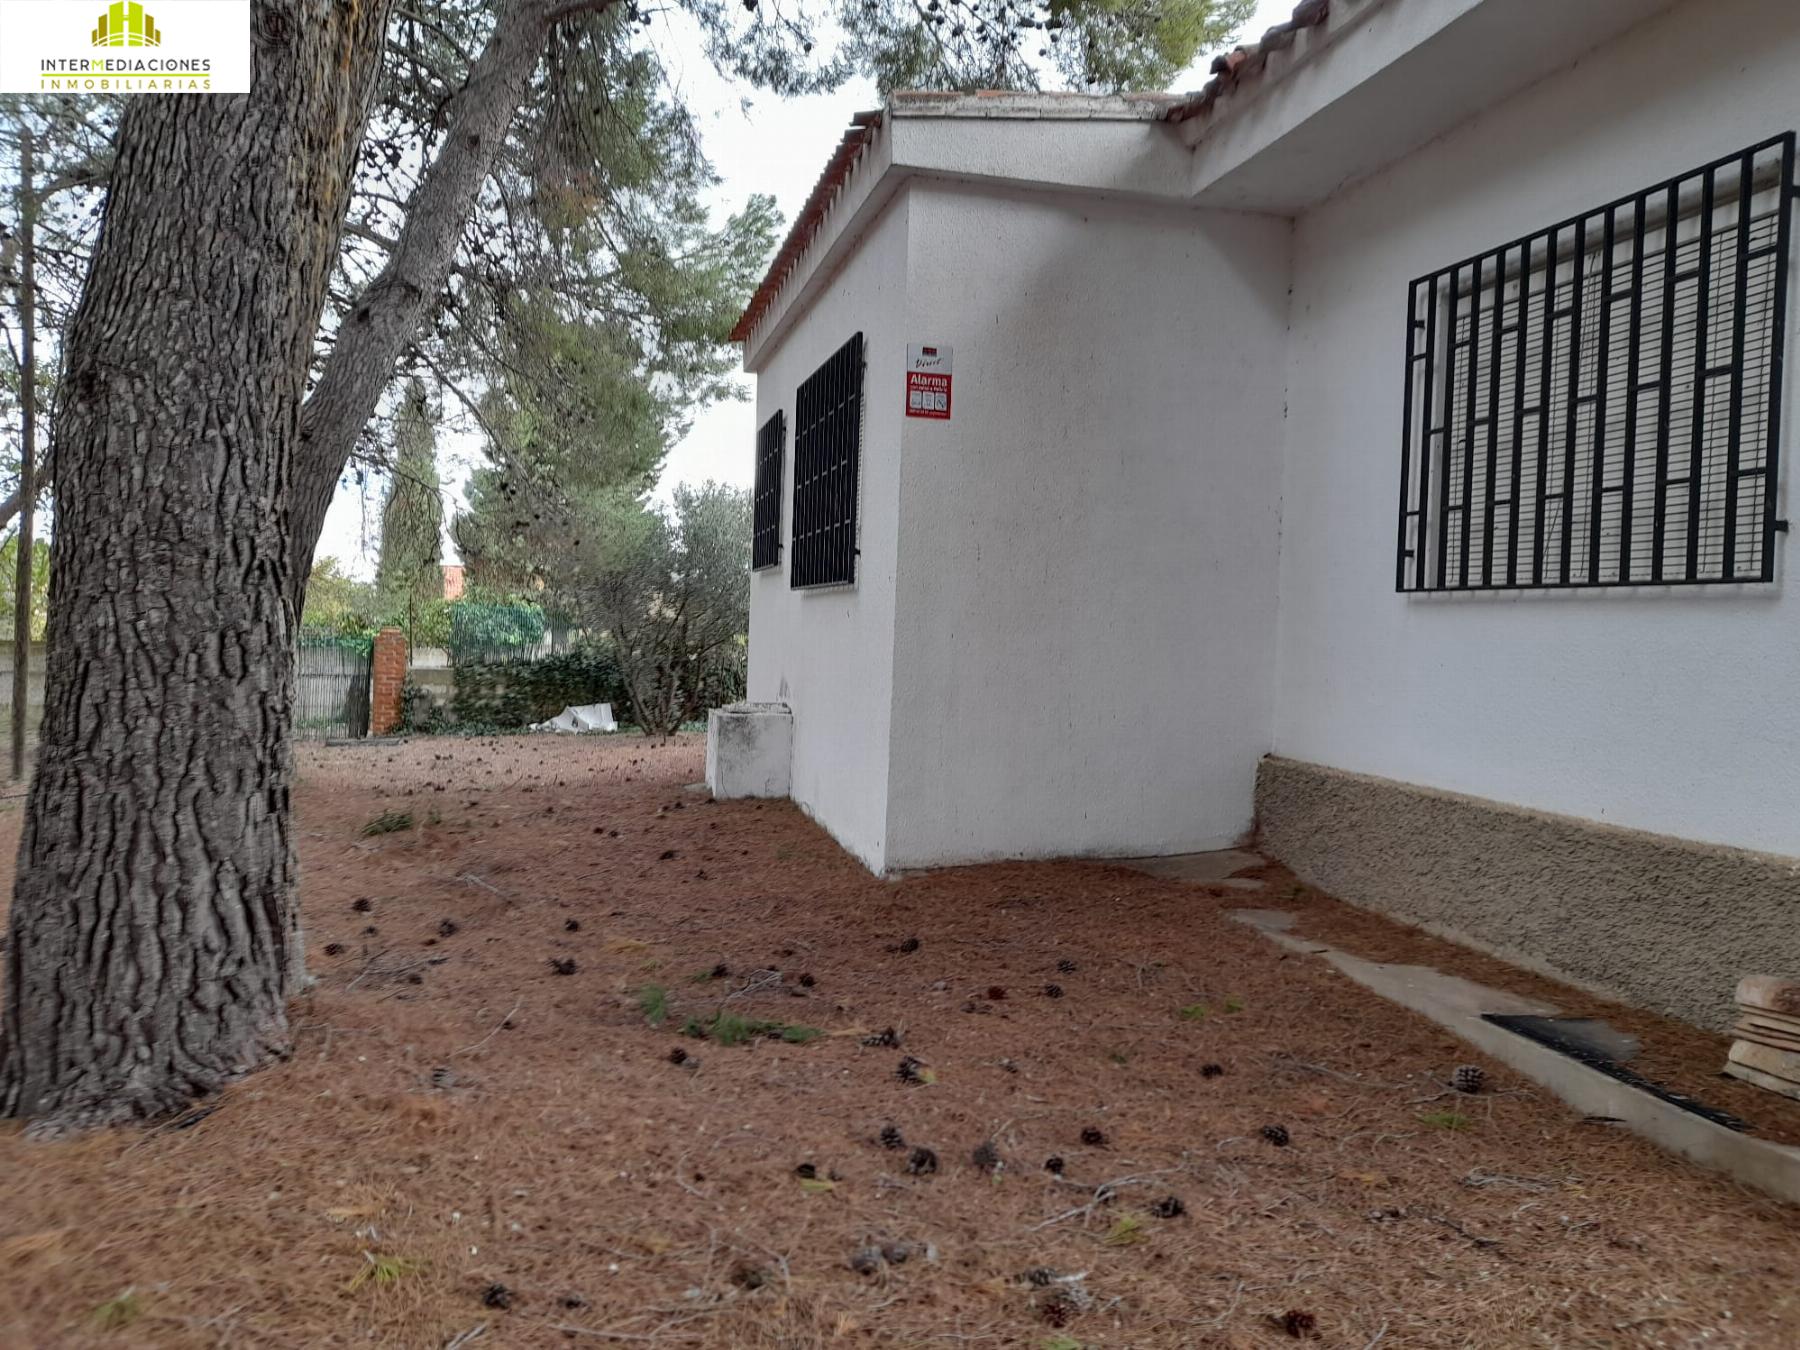 For sale of rural property in Albacete